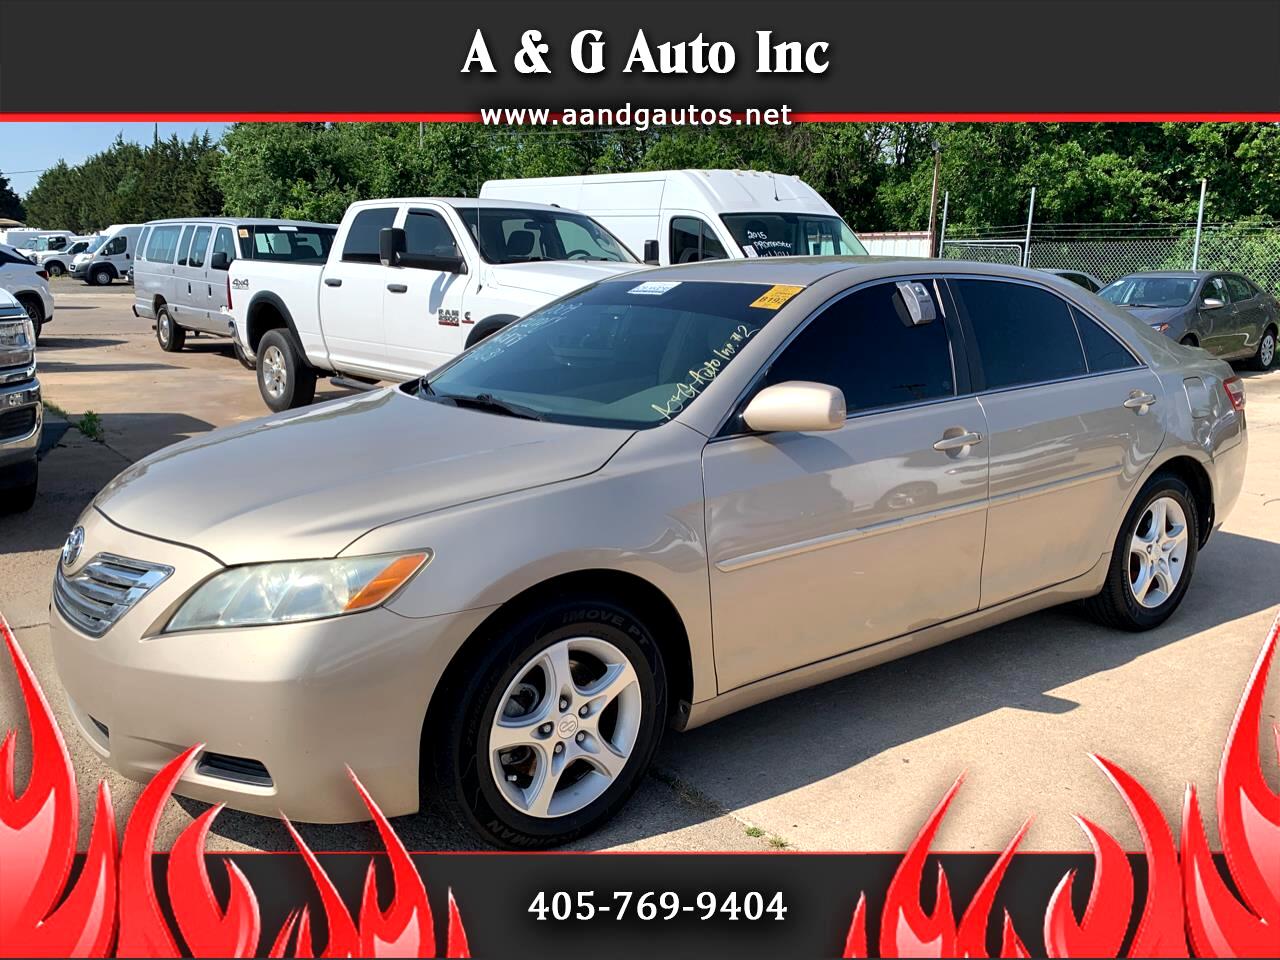 2009 Toyota Camry for sale in Oklahoma City OK 73141 by A & G Auto Inc